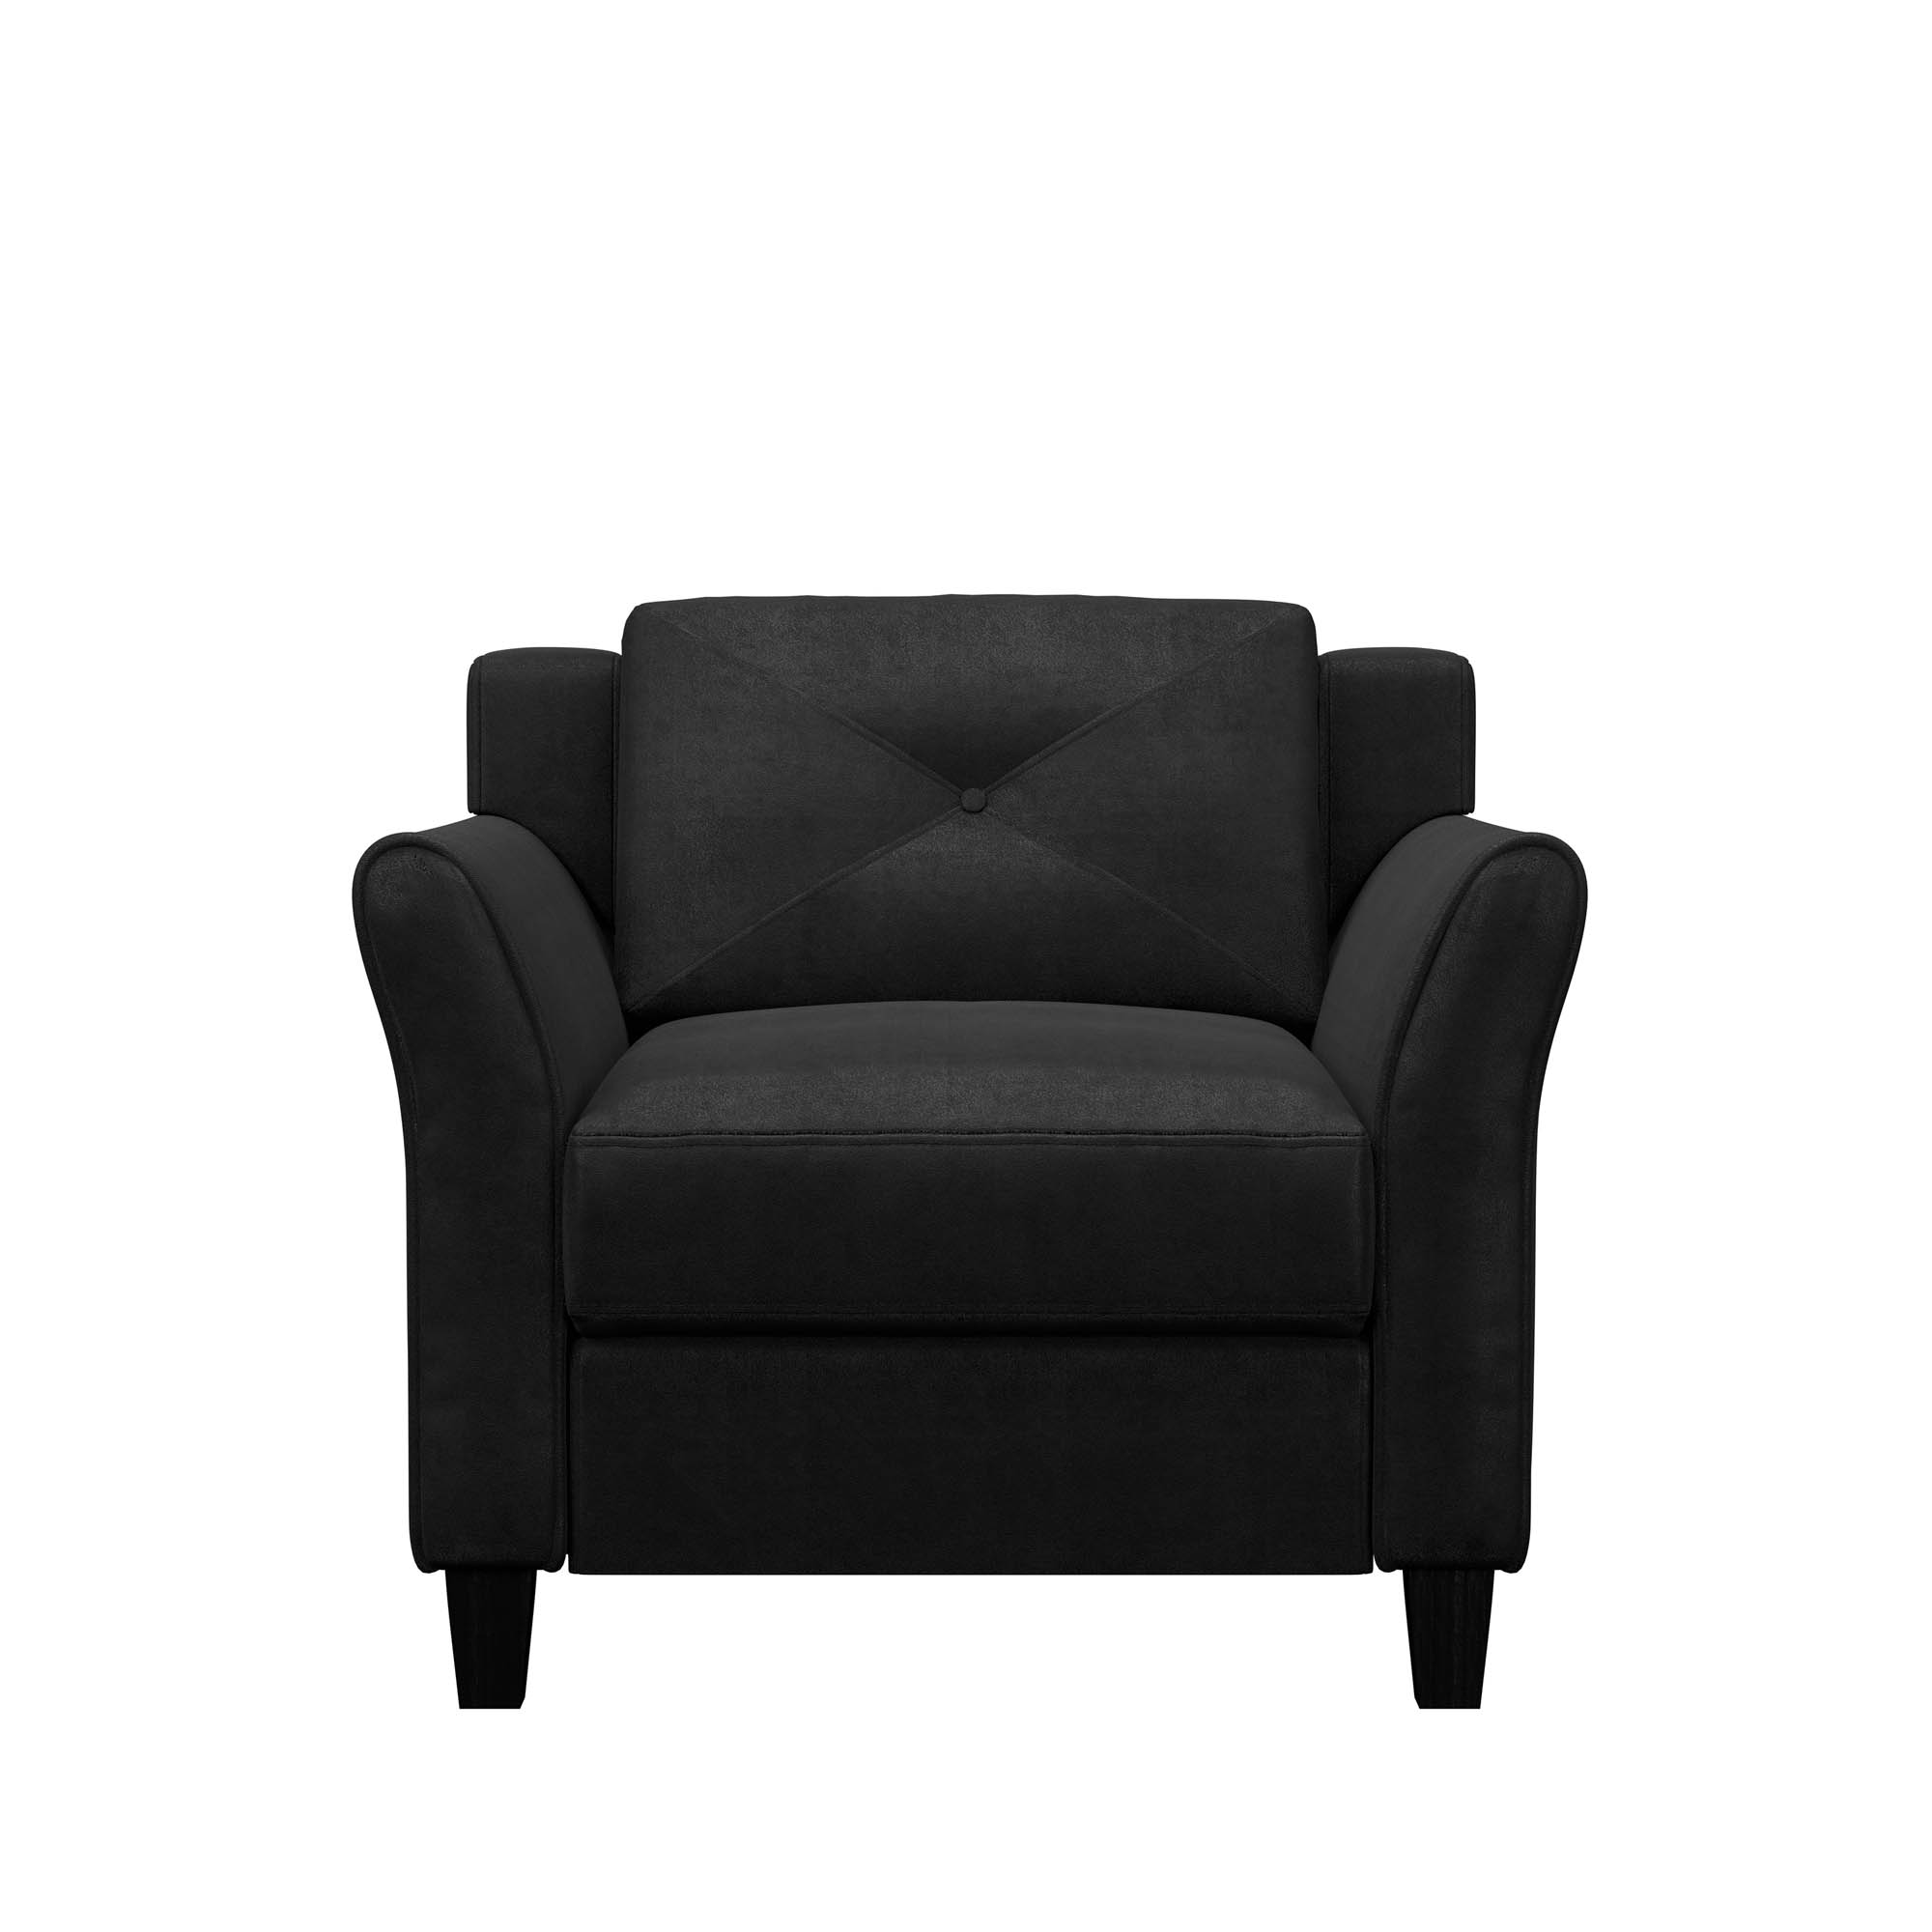 Lifestyle Solutions Taryn Club Chair, Black Fabric - image 2 of 17